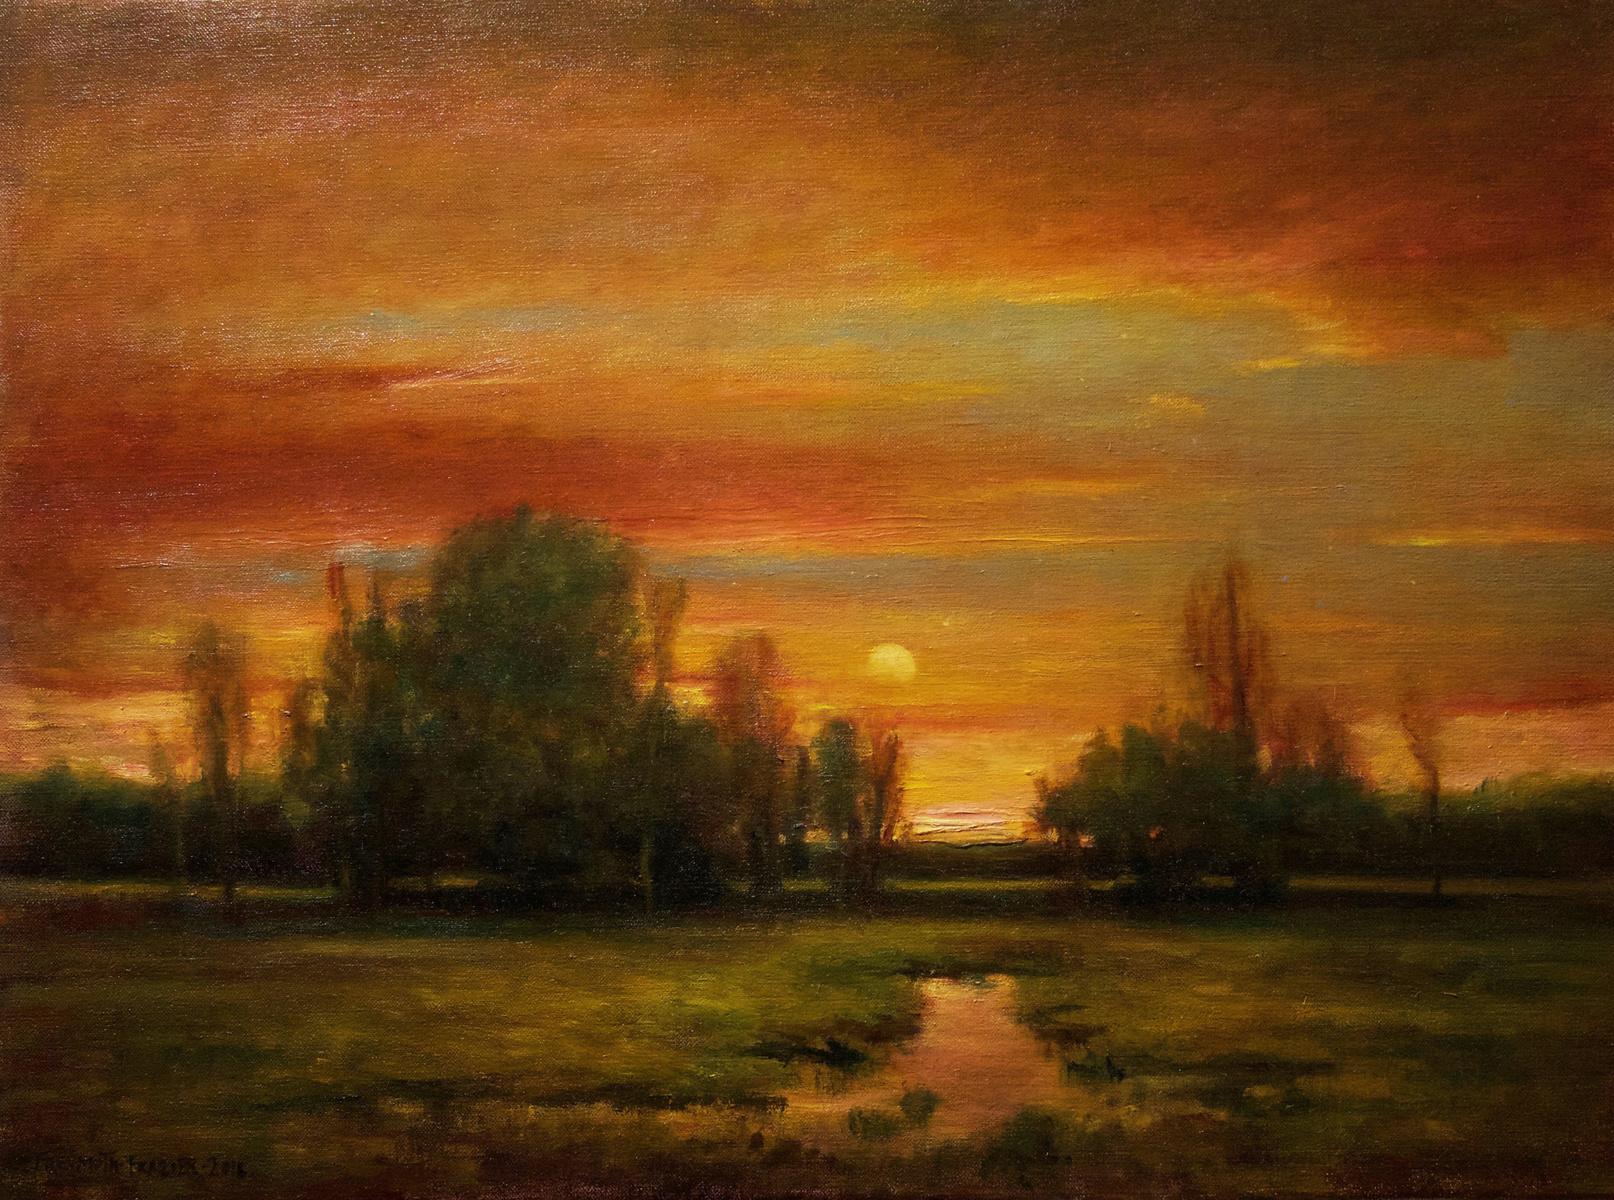 Rose Freymuth-Frazier Landscape Painting - Satin Skies  - Original Oil Painting with Soft Light Reflecting Romantic Colors